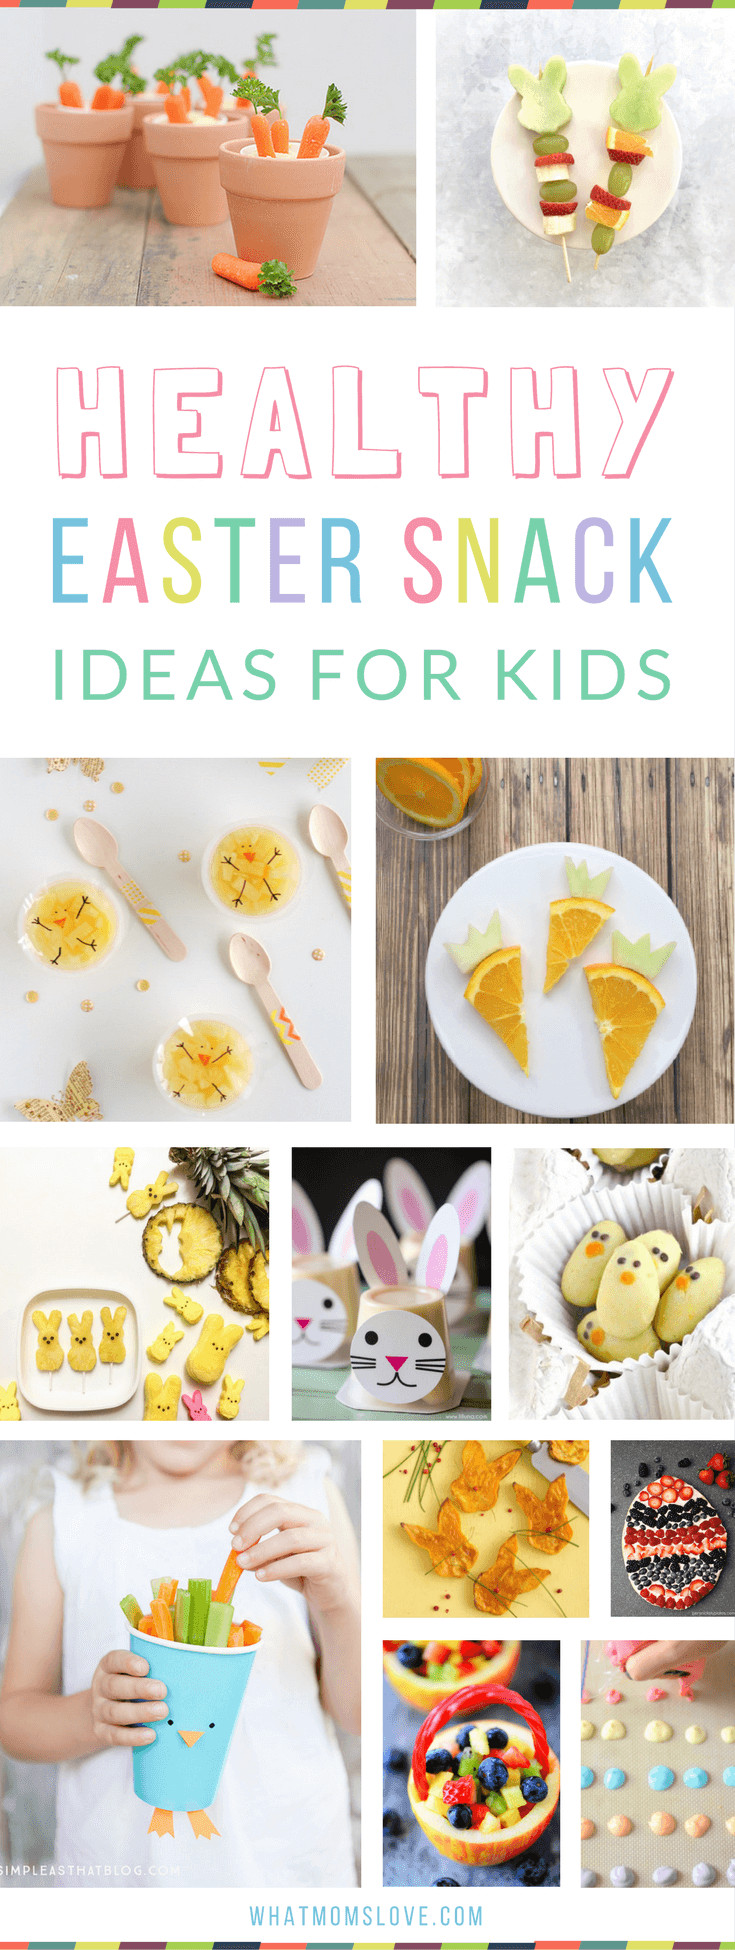 School Easter Party Food Ideas
 A Day s Worth Creative Easter Eats Breakfast Lunch